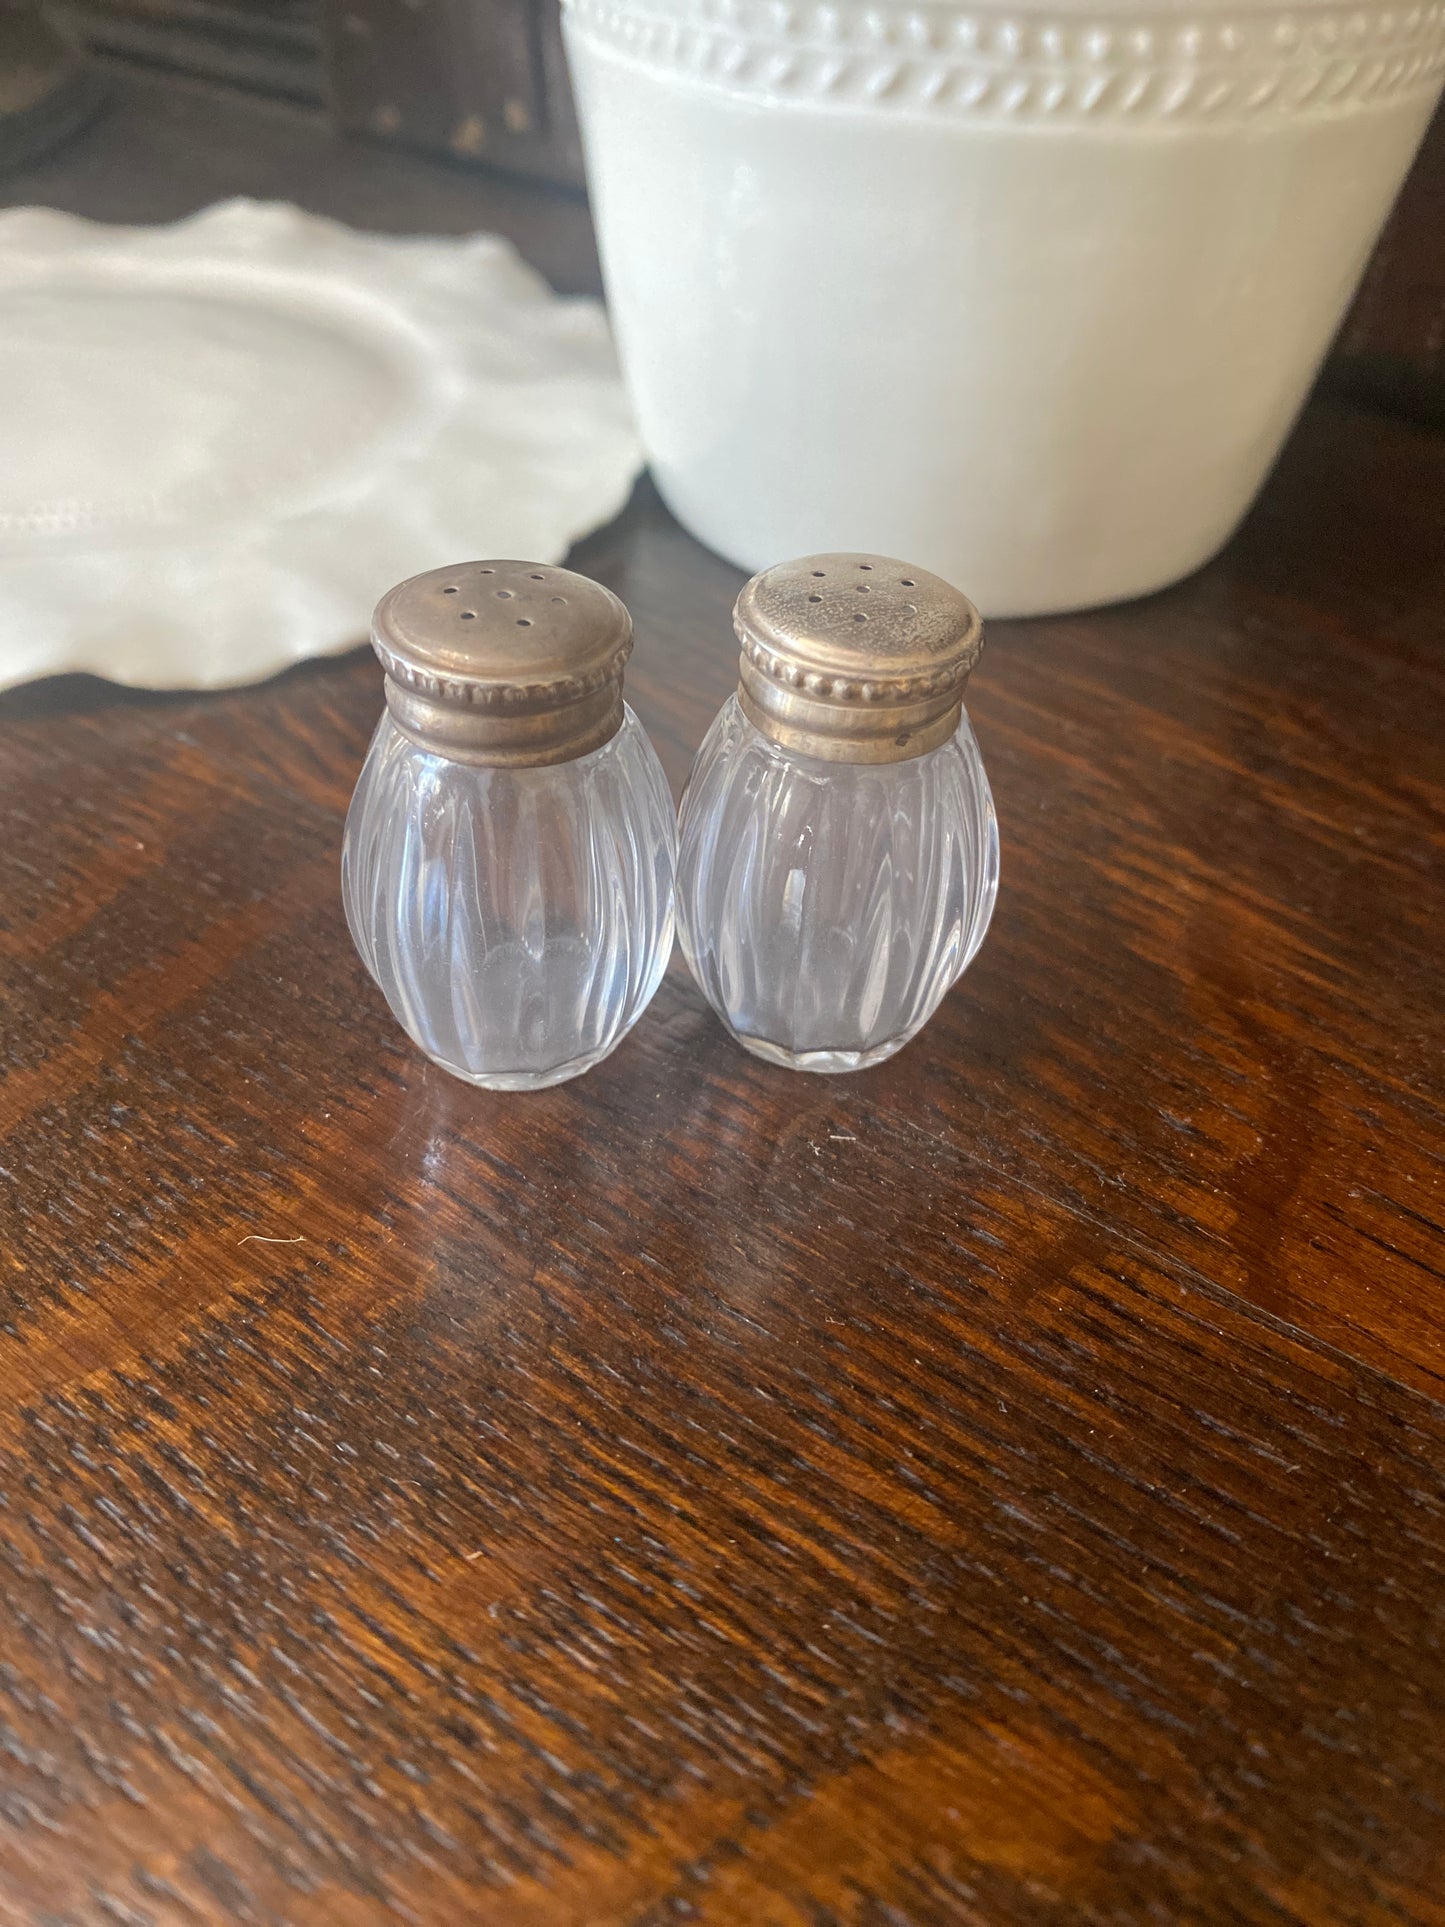 Christofle Orfevrerie Silver and Glass Salt Shakers